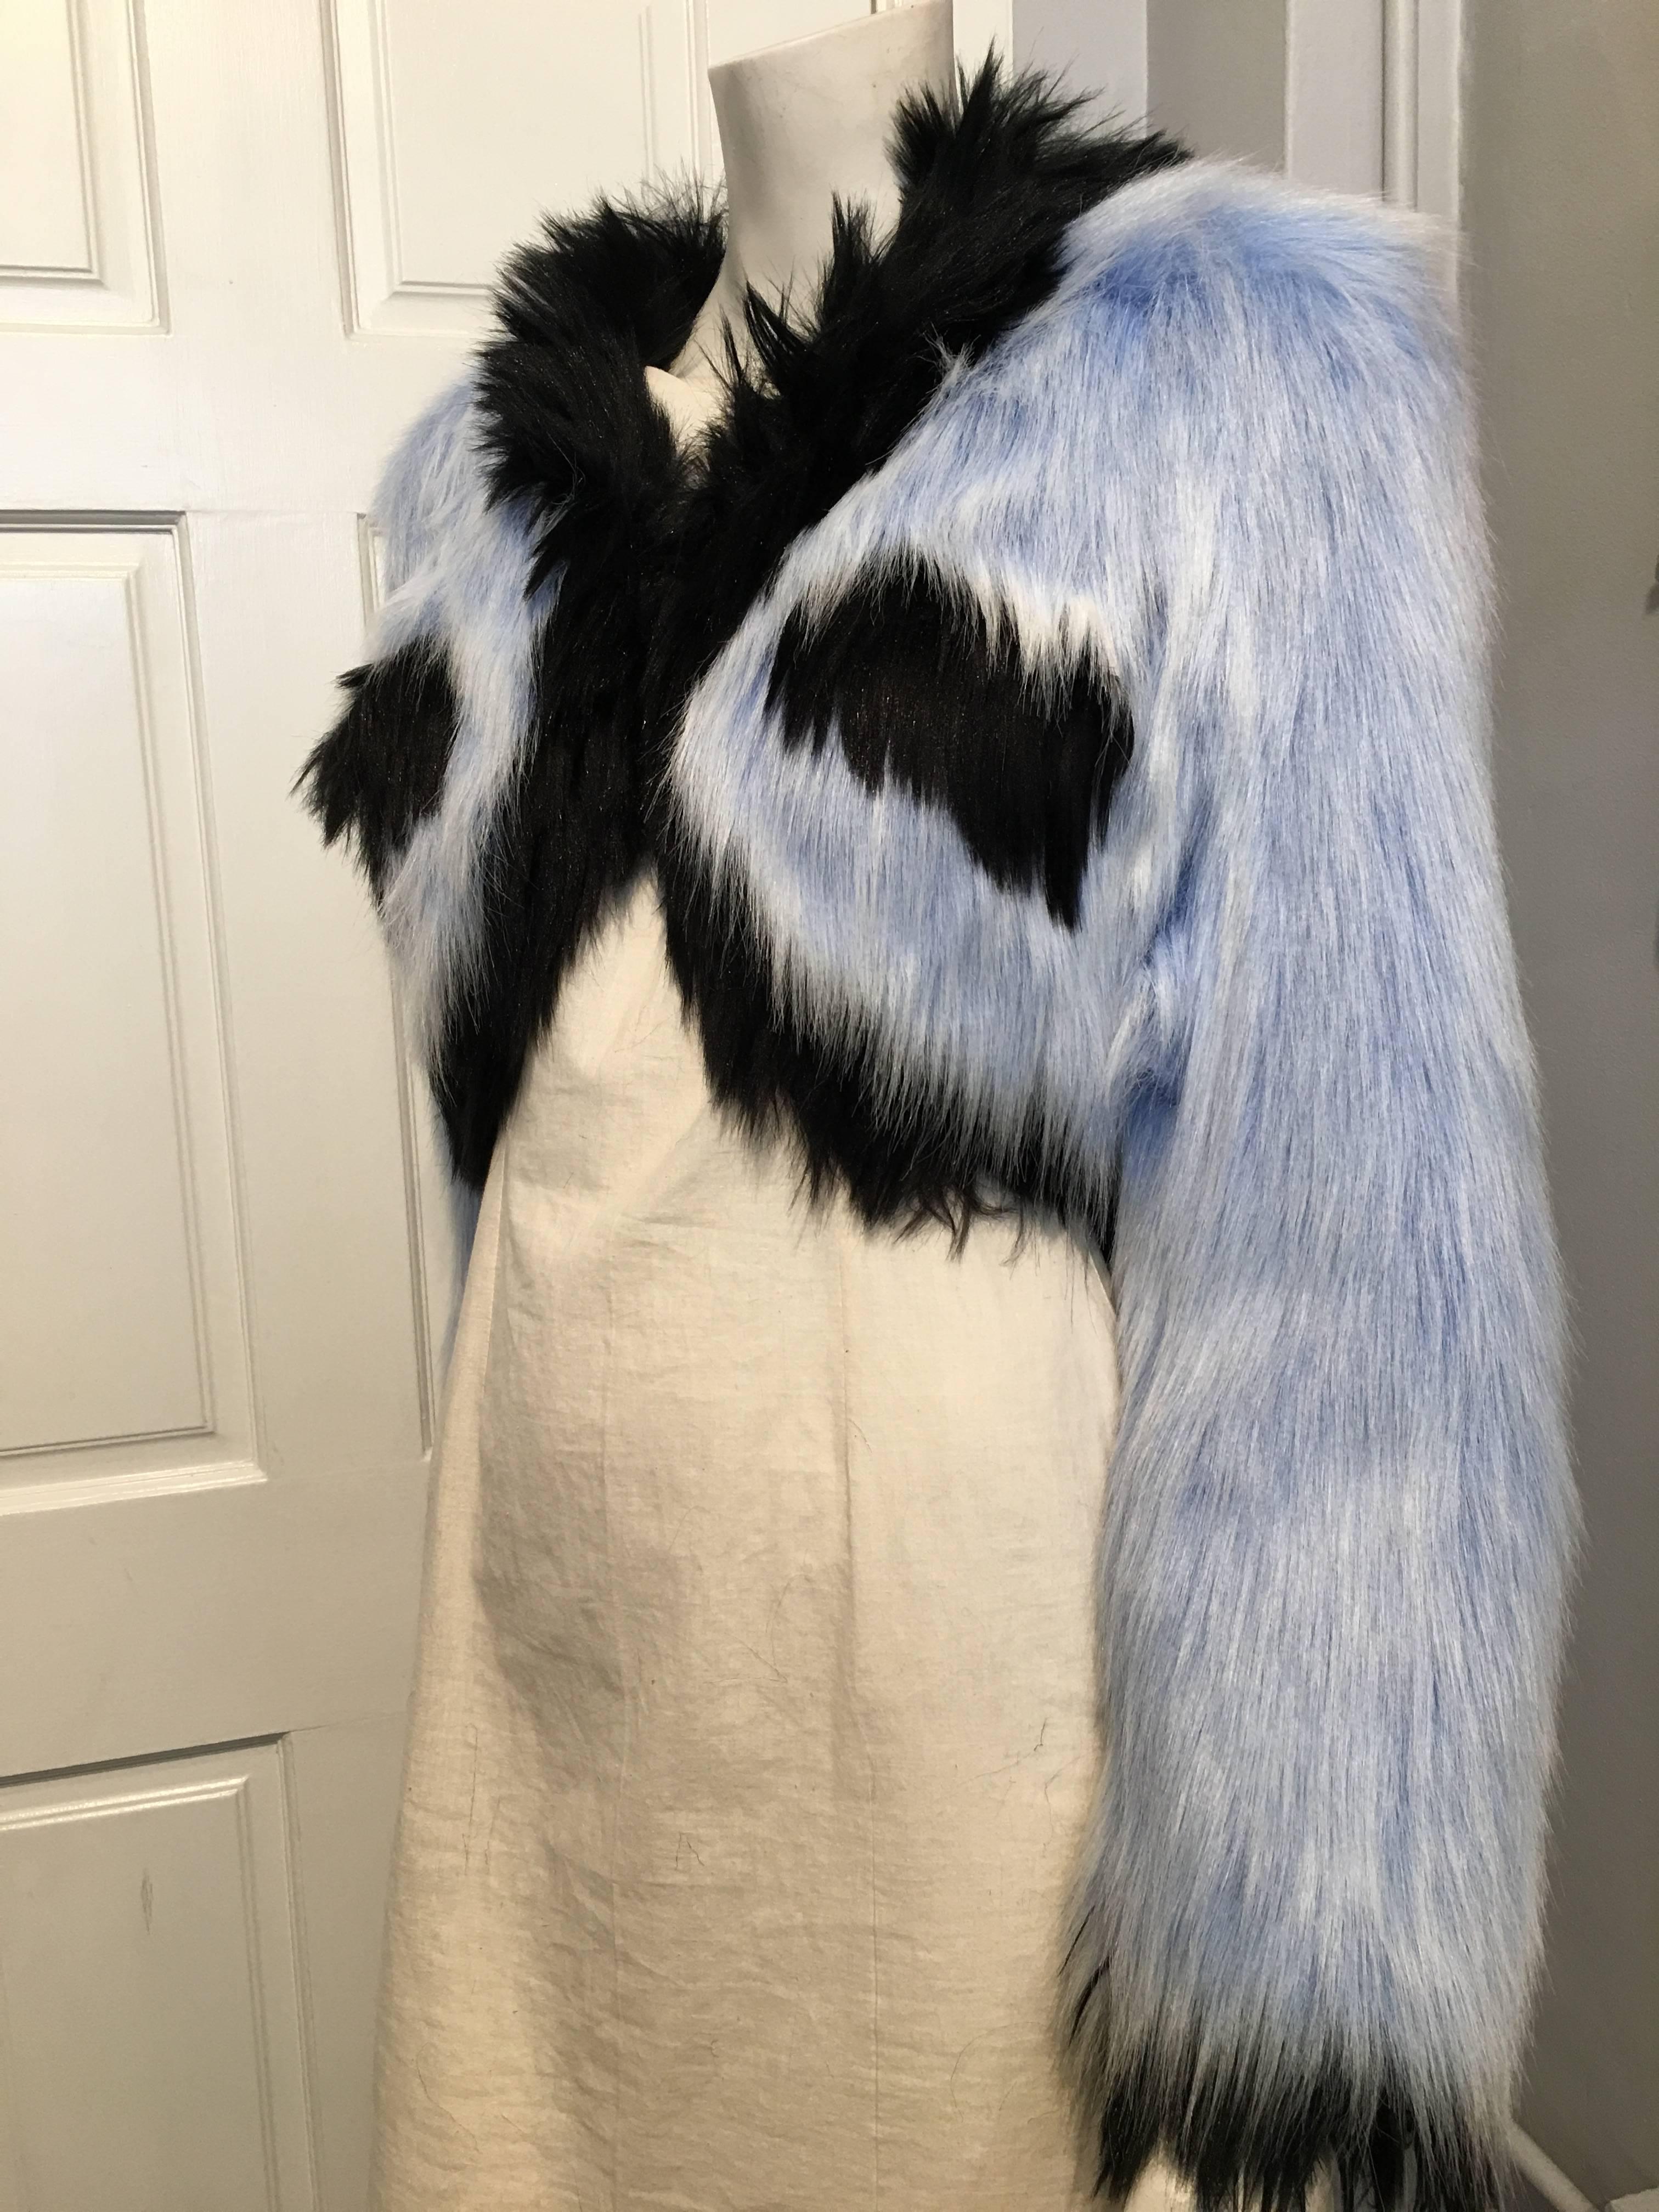 Chanel faux fur cropped jacket in blue and black. it closes with a single hook and eye. The black silk lining features the brand name in large white text.